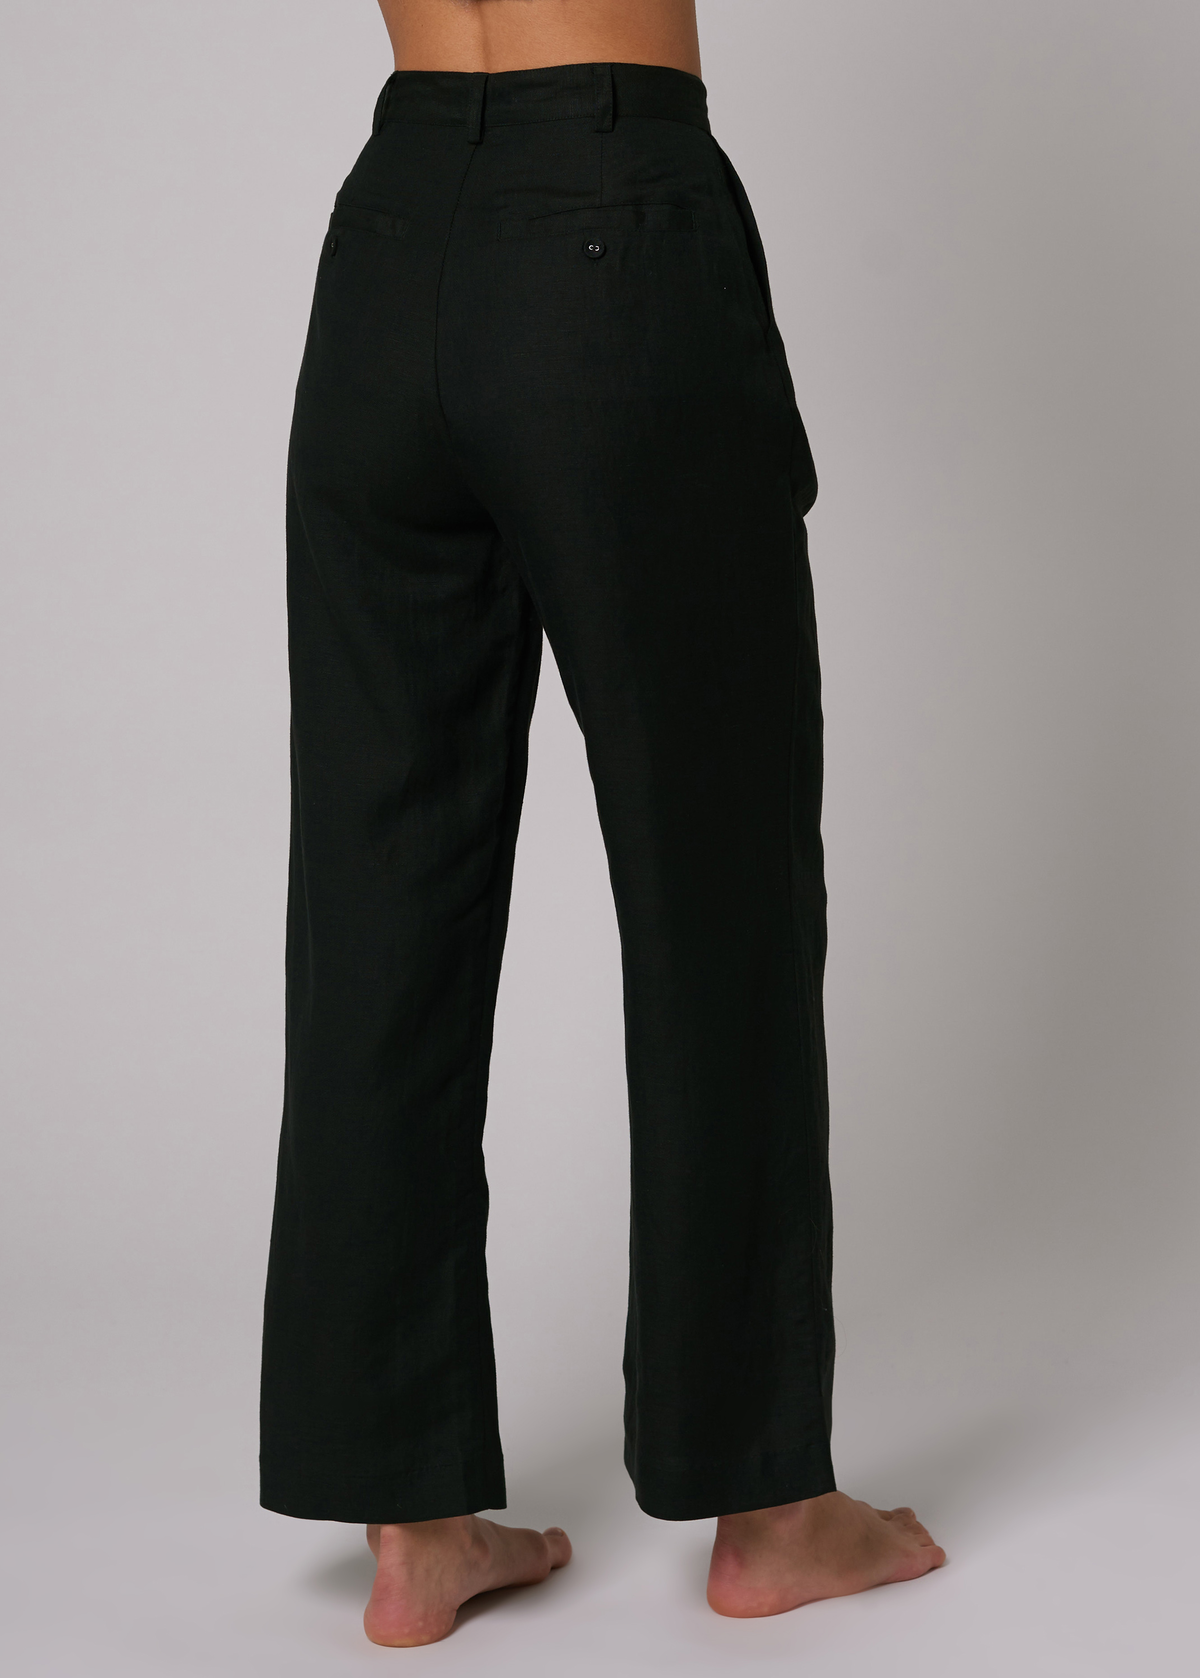 The Rolla's Jeans Chloe Pleat Linen pant: 80s menswear inspired black linen blend pants with a high rise waist, pleated front, and relaxed ankle length leg. 